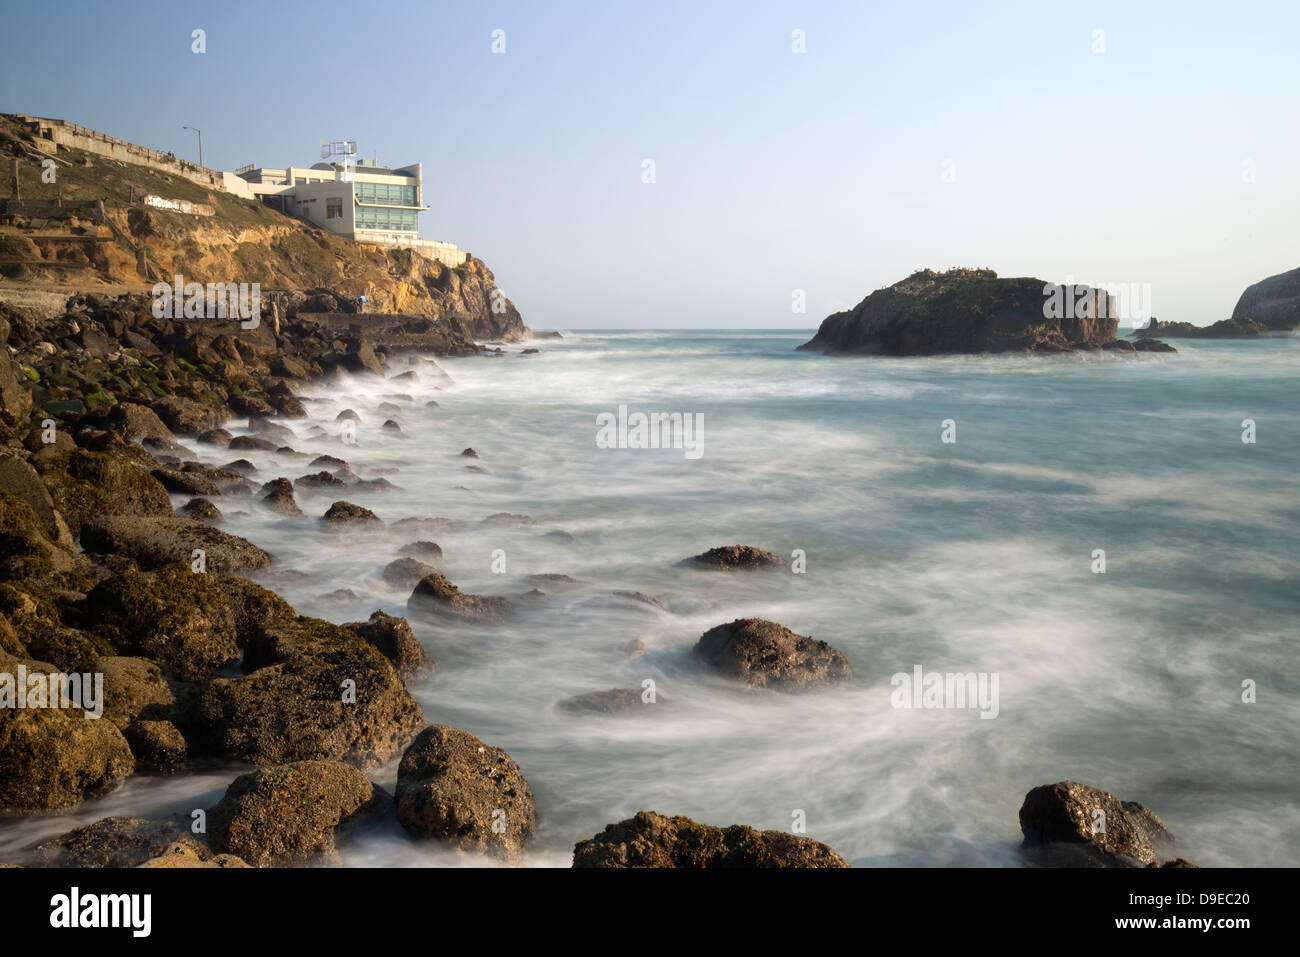 The famous Cliff House Bistro sits perched above the Pacific Ocean in San Francisco, CA. Stock Photo